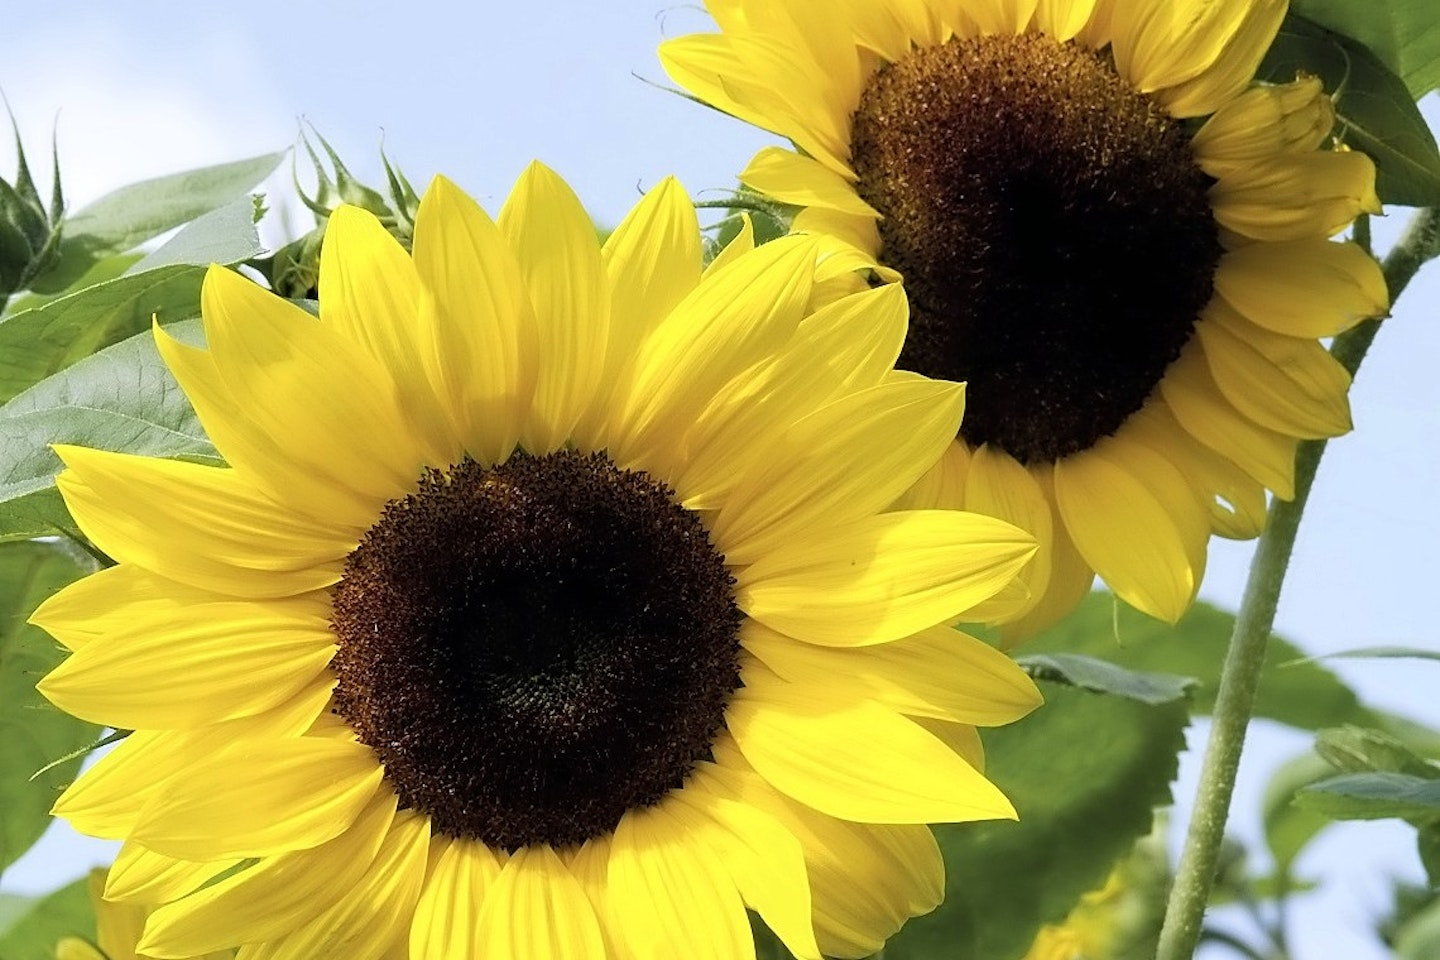 How to grow great sunflowers